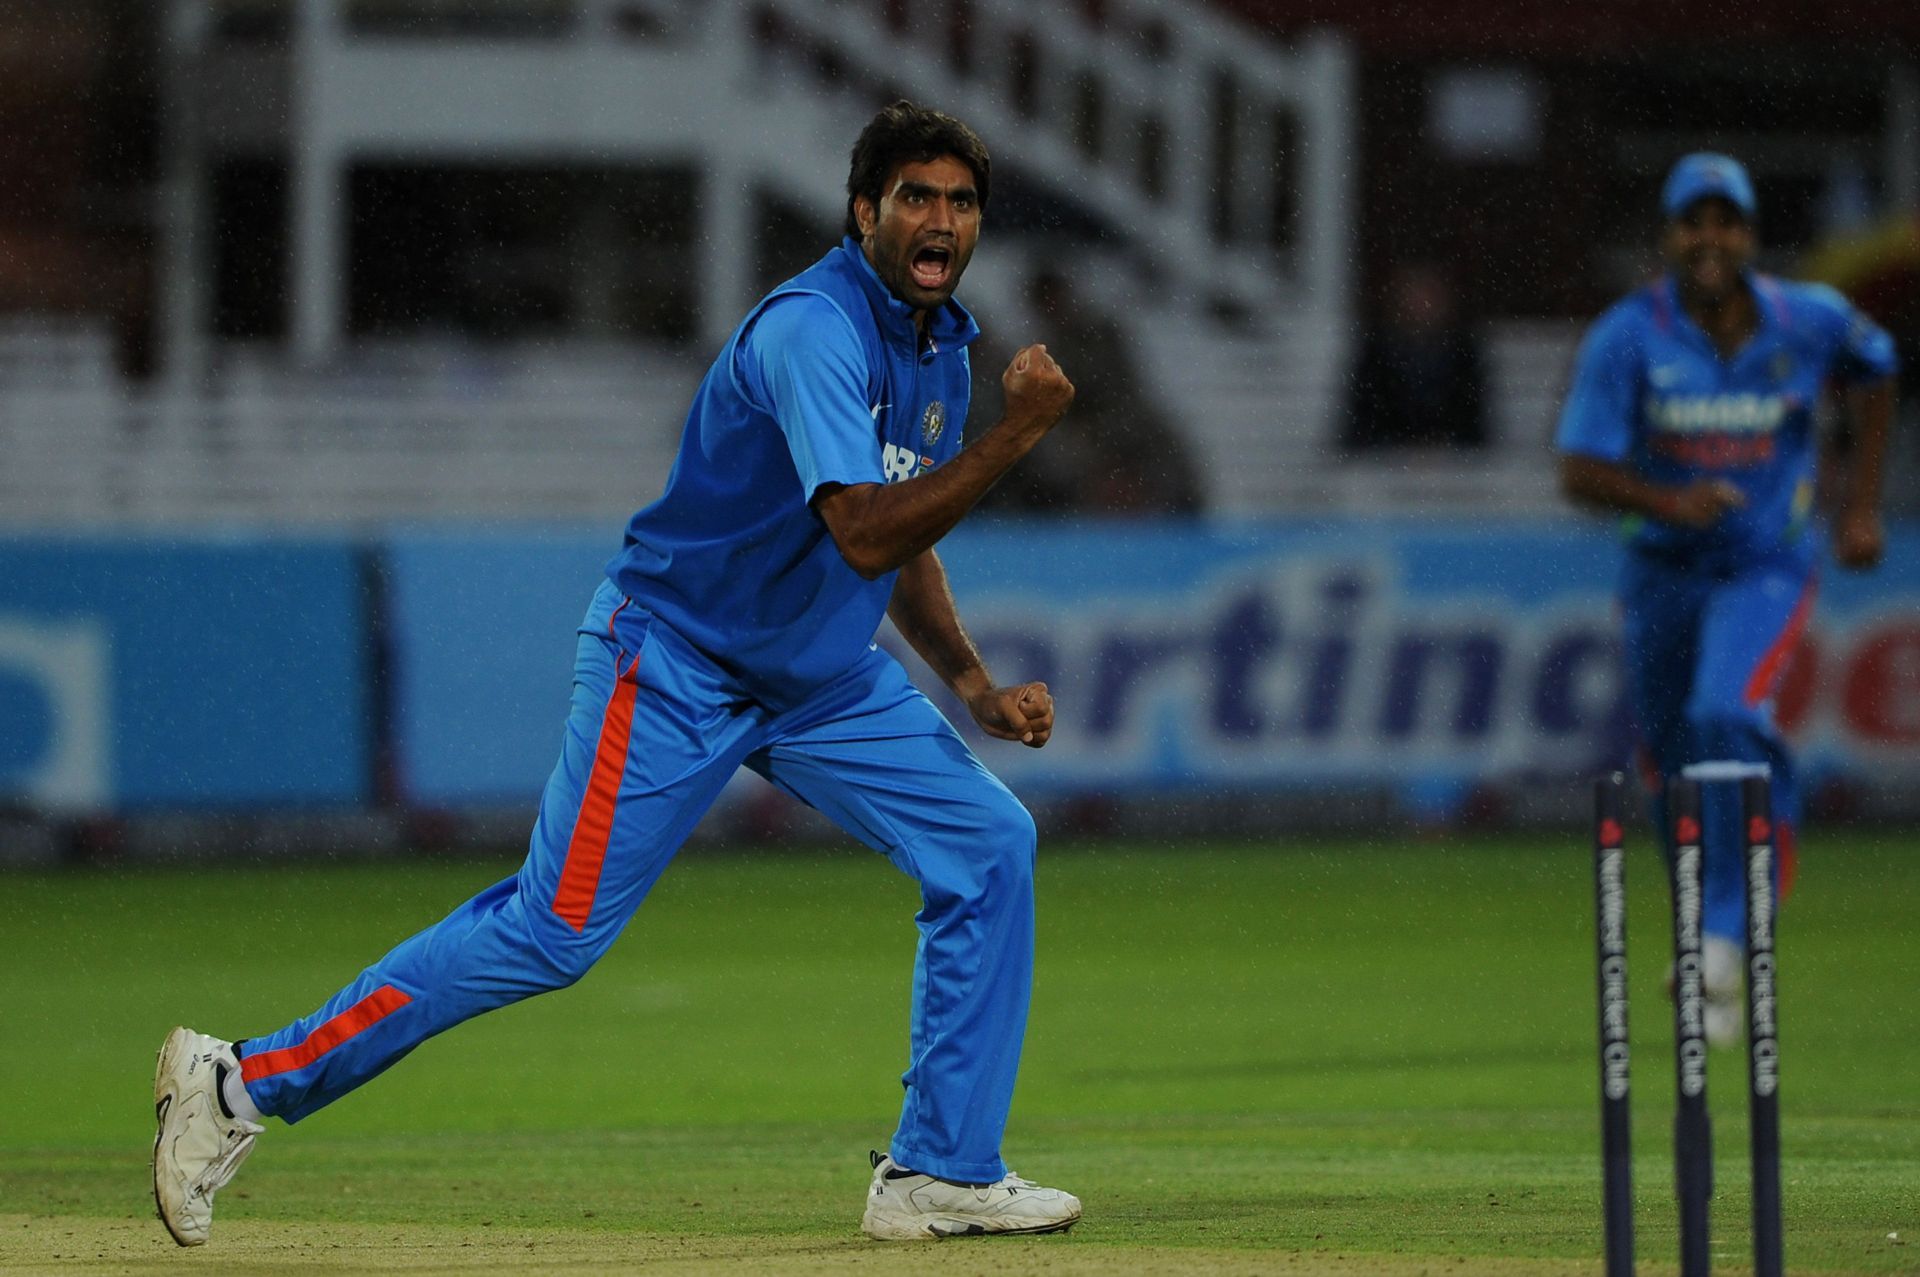 Munaf Patel bowled a brilliant spell during the 2011 Johannesburg ODI. Pic: Getty Images